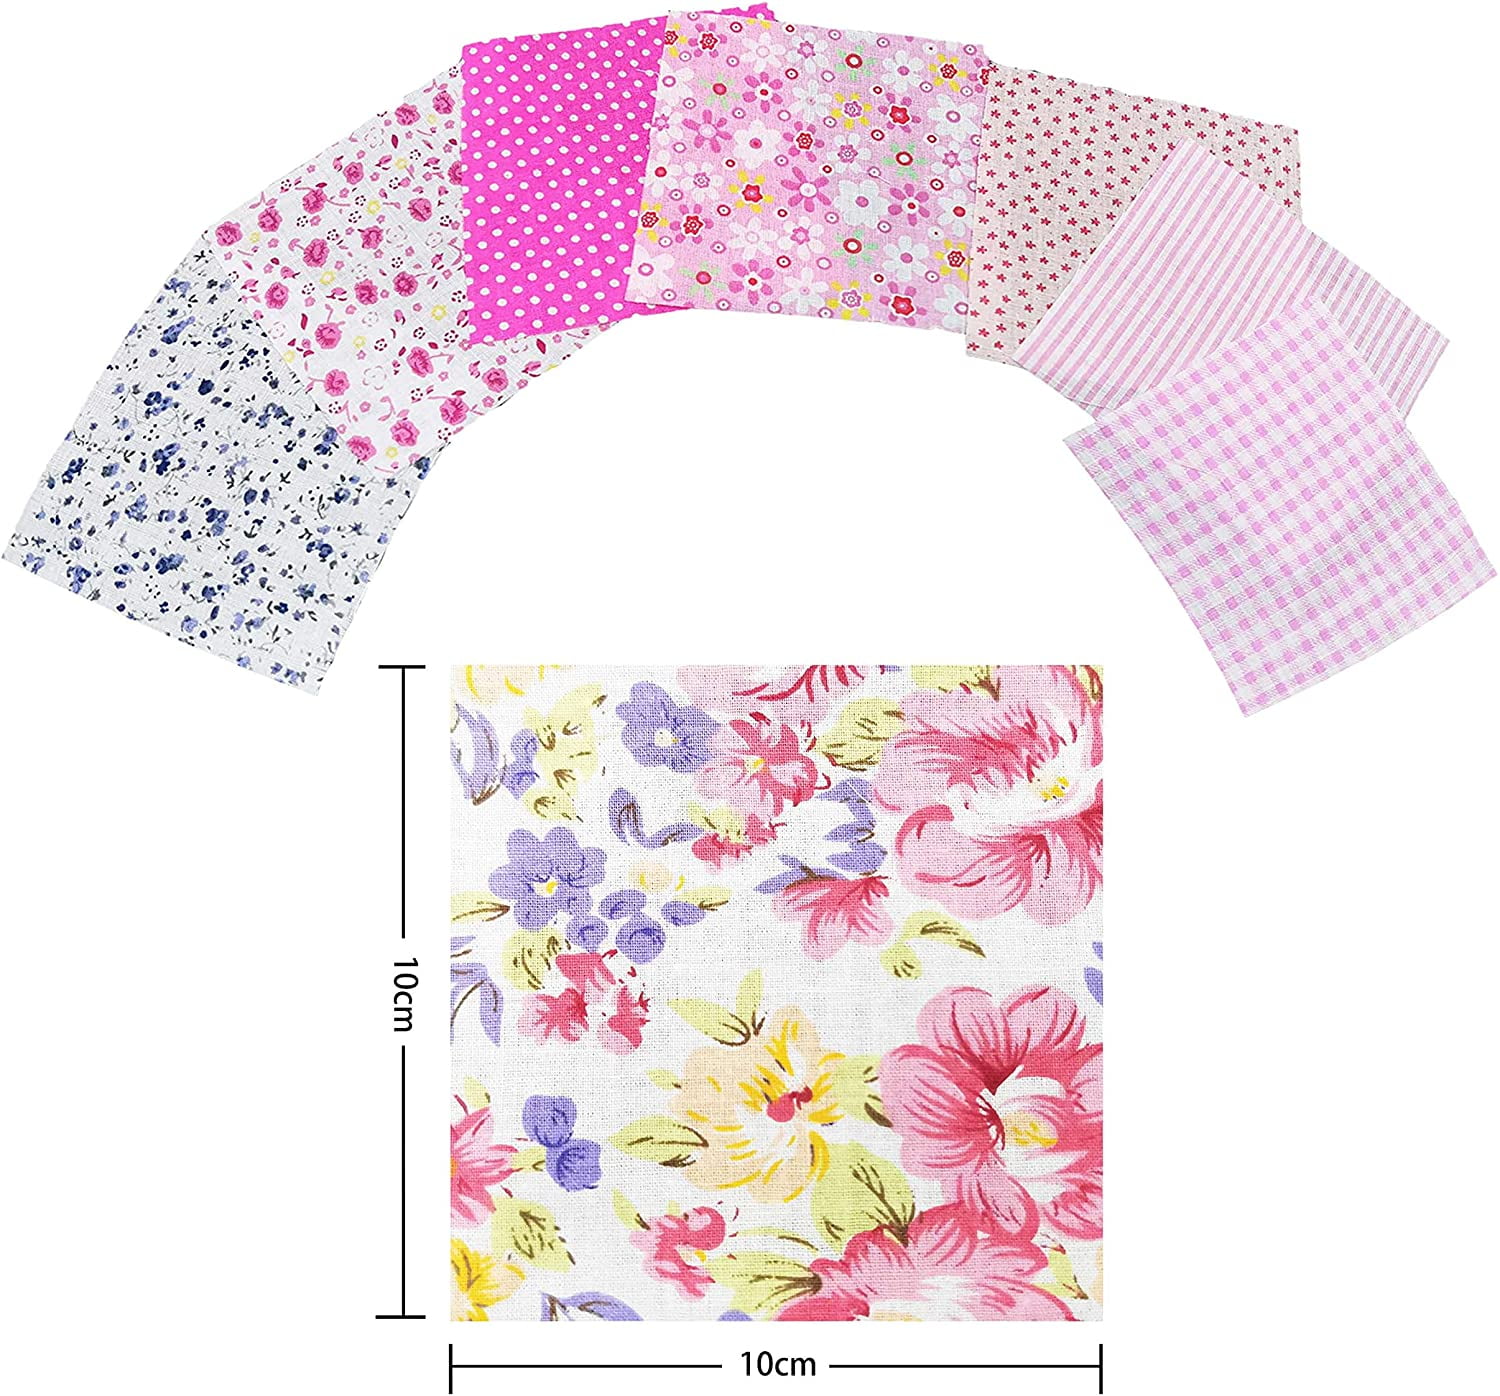 10cm x 10cm for DIY Sewing Quilting Scrapbooking 100 PCS Cotton Craft Fabric Bundle Squares Patchwork Lint Different Designs 4X 4inches 